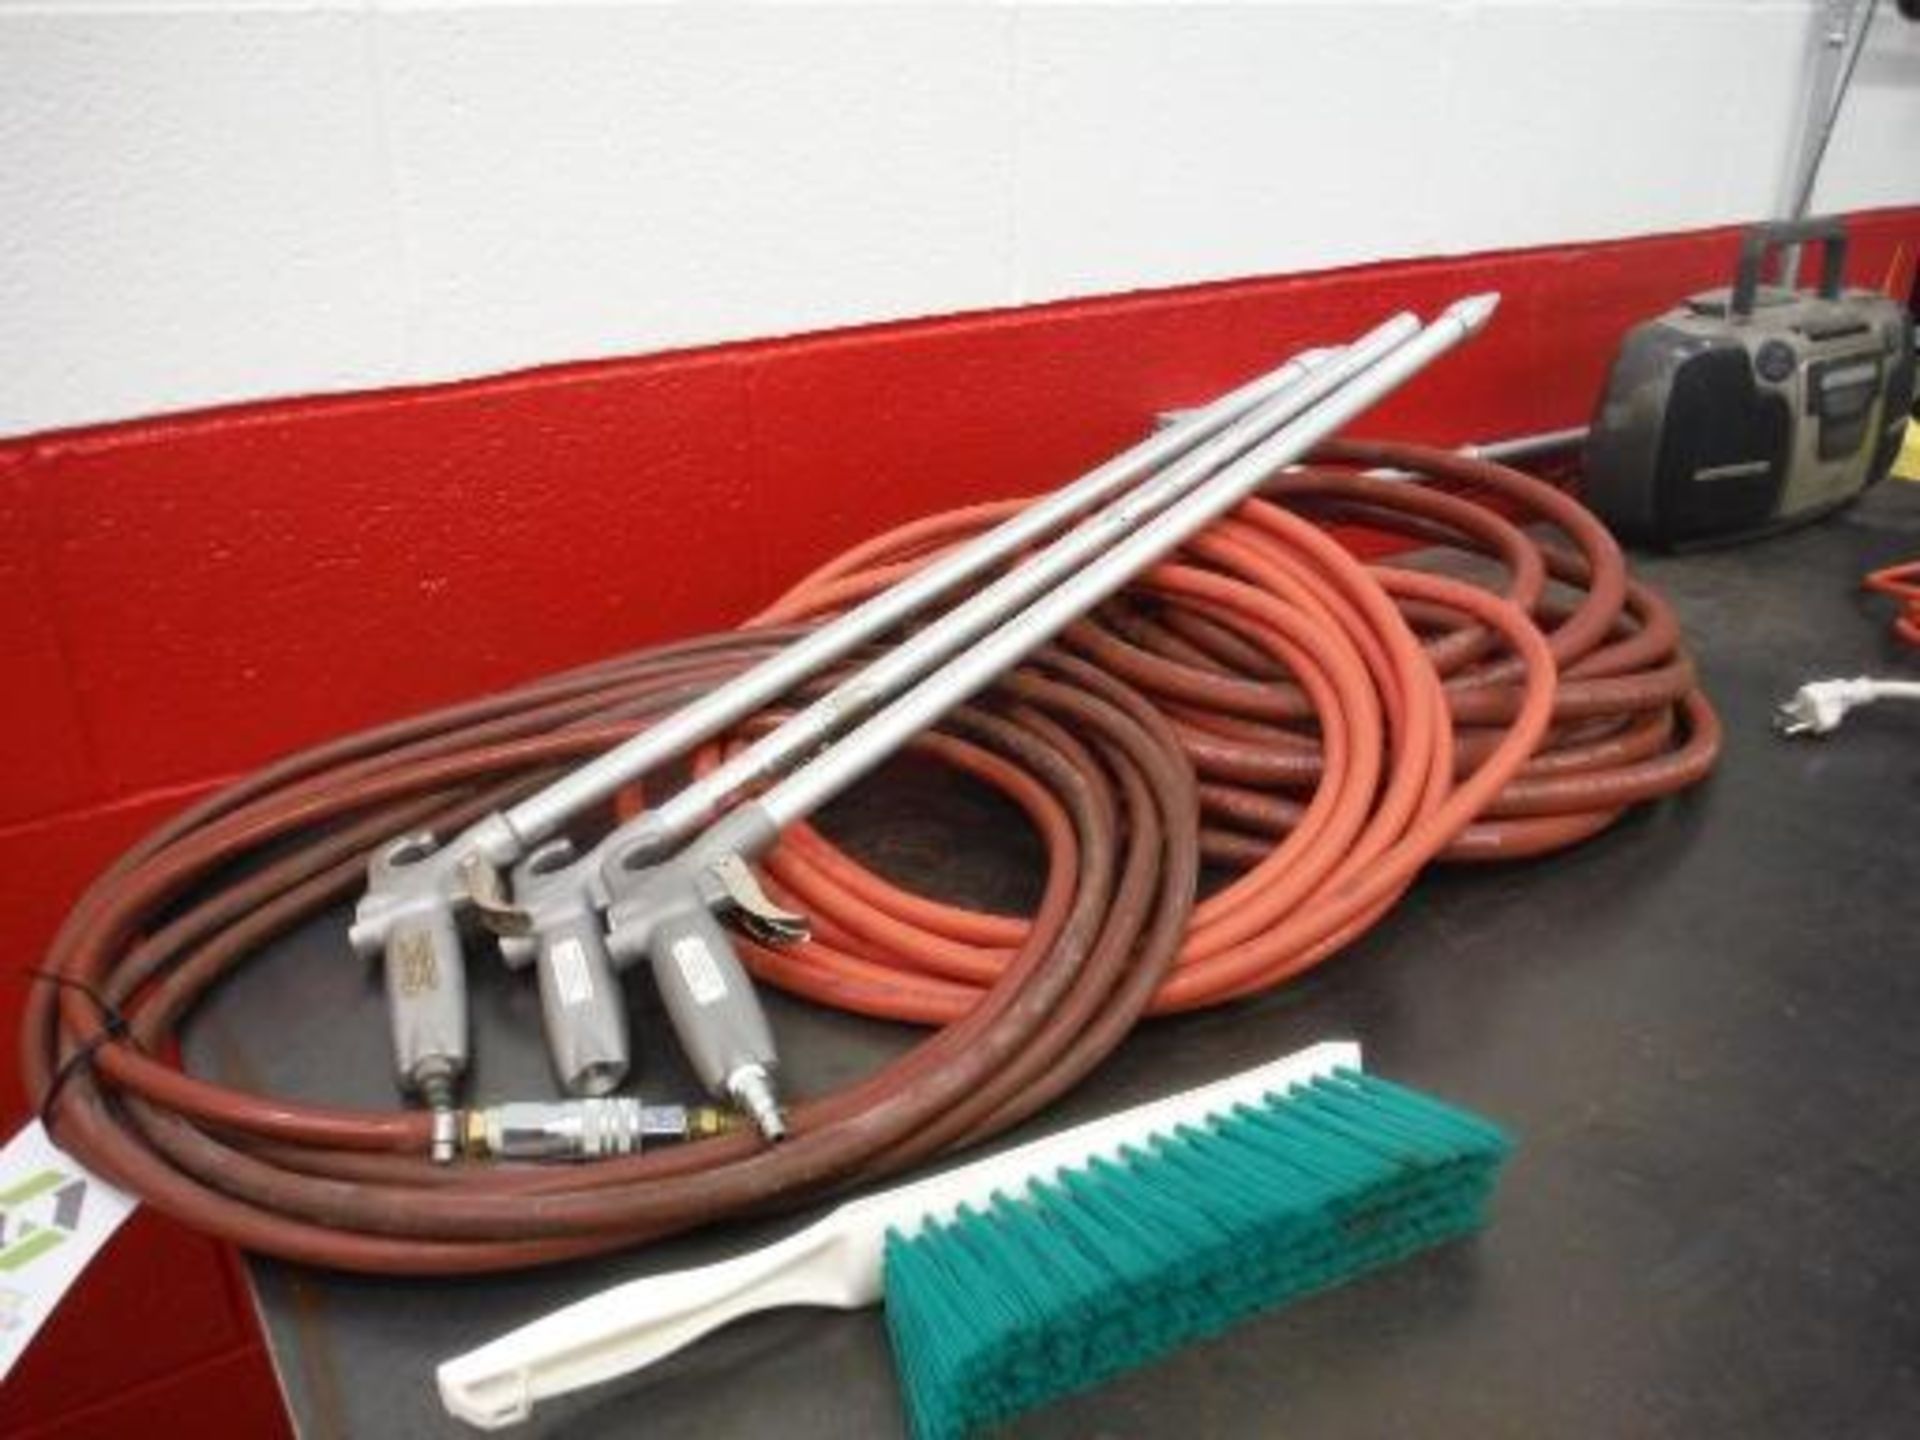 Miscellaneous air hoses and air hose attachments. Located in Marion, Ohio Rigging Fee: $25